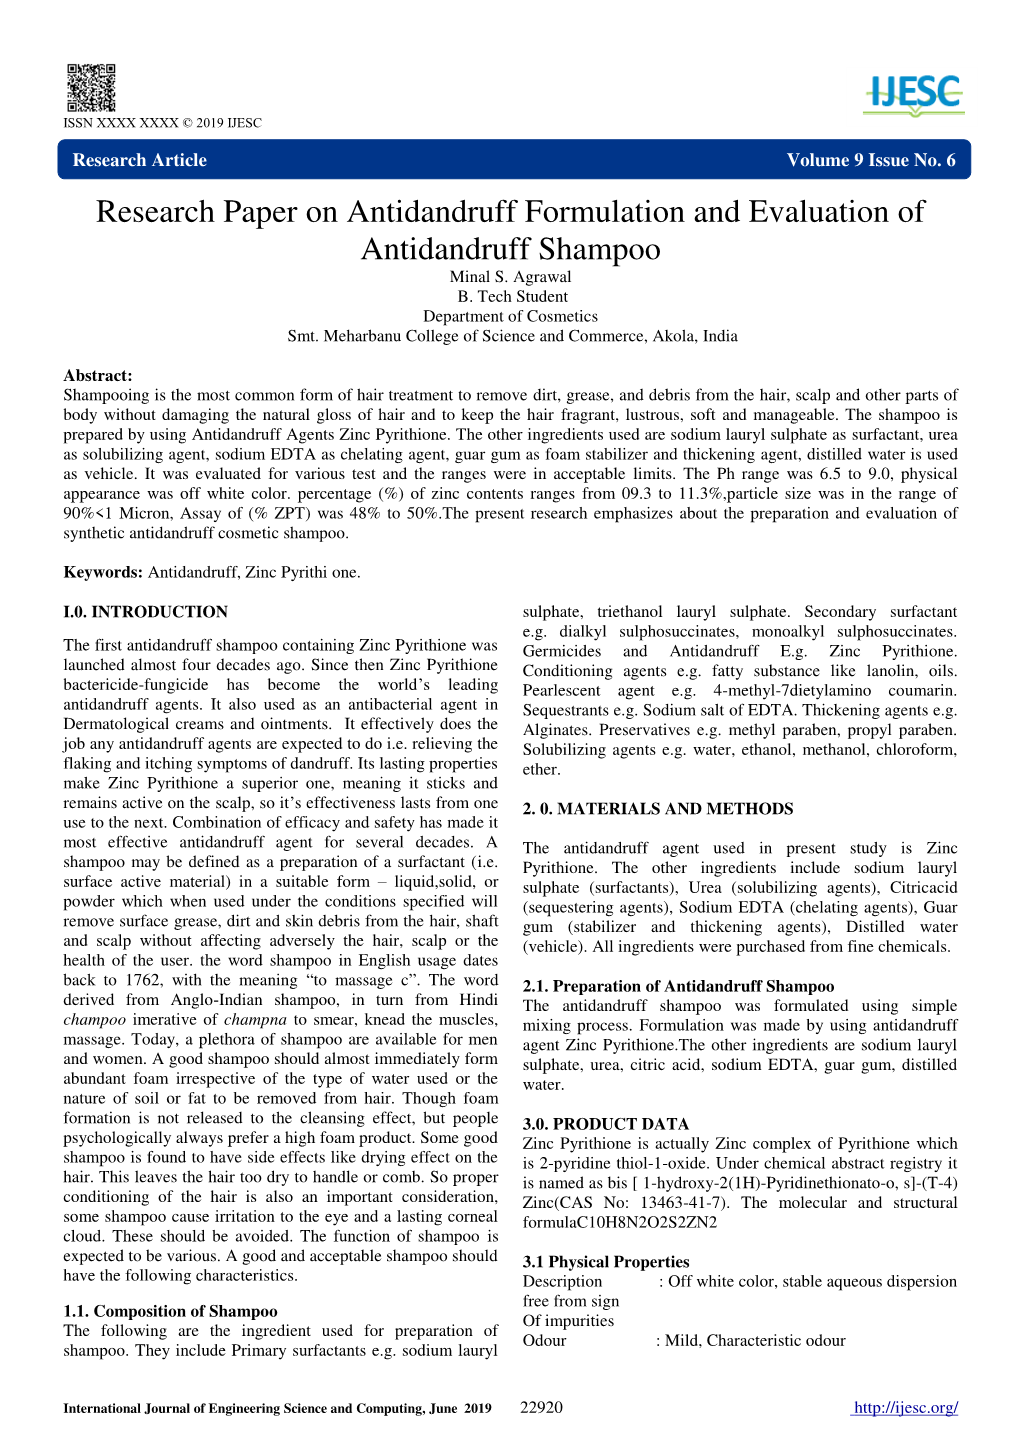 Research Paper on Antidandruff Formulation and Evaluation of Antidandruff Shampoo Minal S